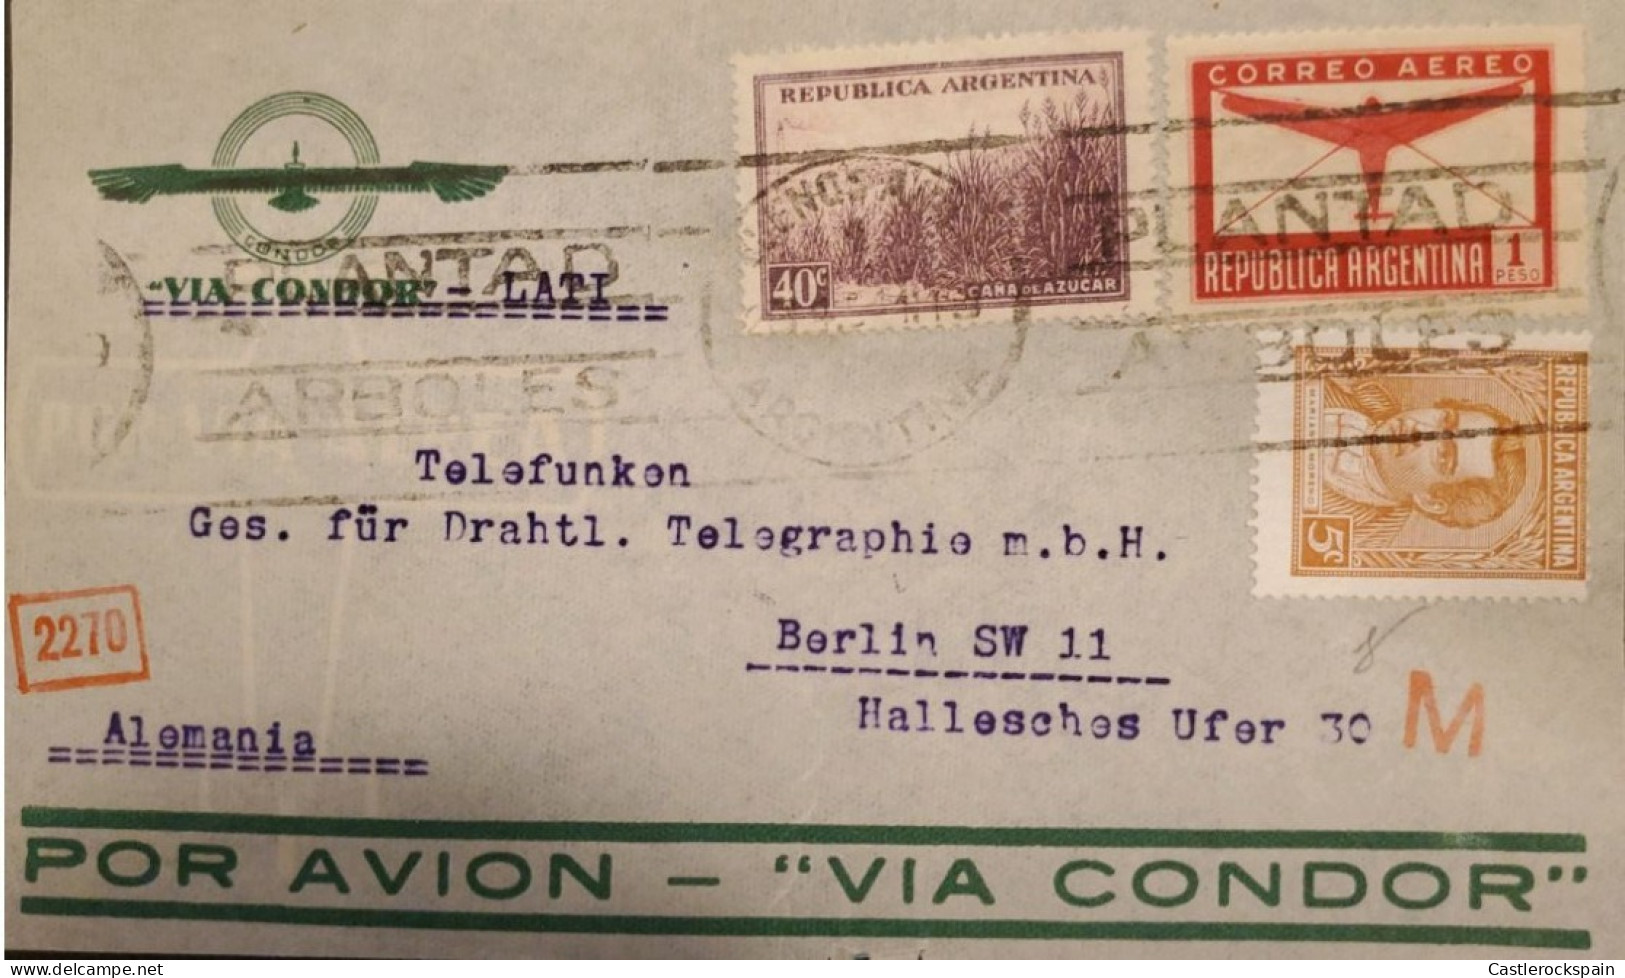 MI) 1936-42, ARGENTINA, AIR MAIL, VIA CONDOR, FROM BUENOS AIRES TO GERMANY, WITH CANCELLATION SLOGAN, MARIANO MORENO STA - Used Stamps